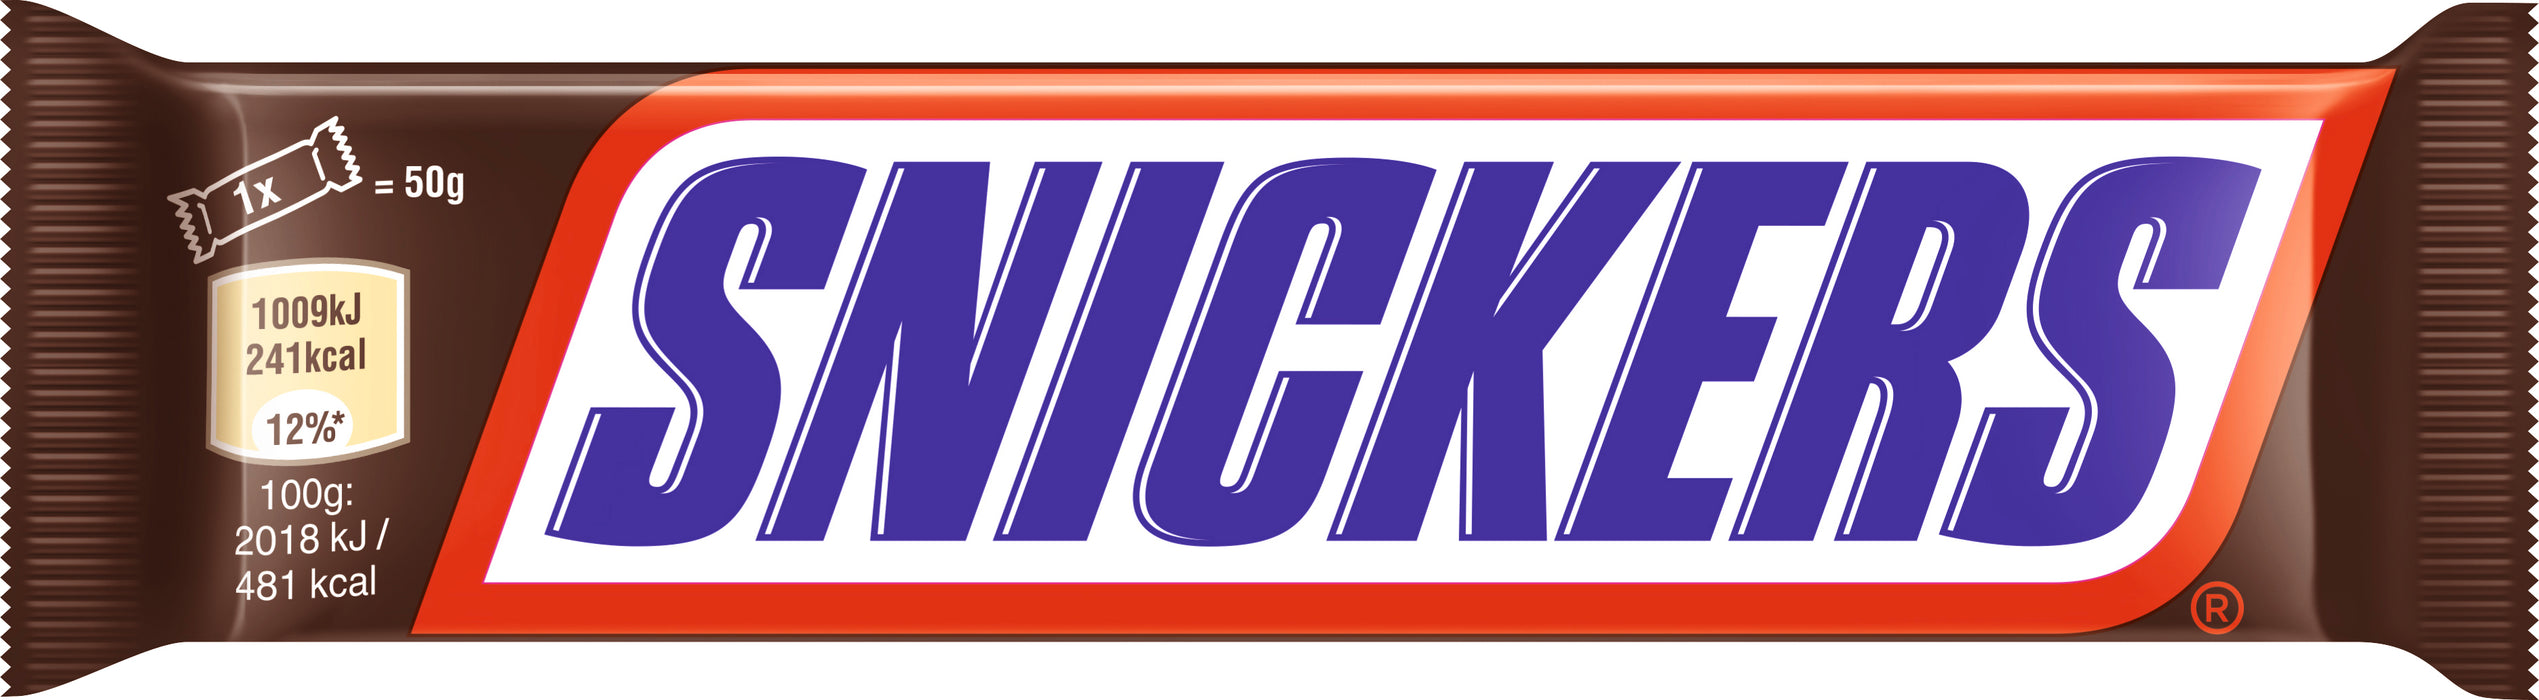 Snickers Riegel Display 32x 50g (1,60 Kg)